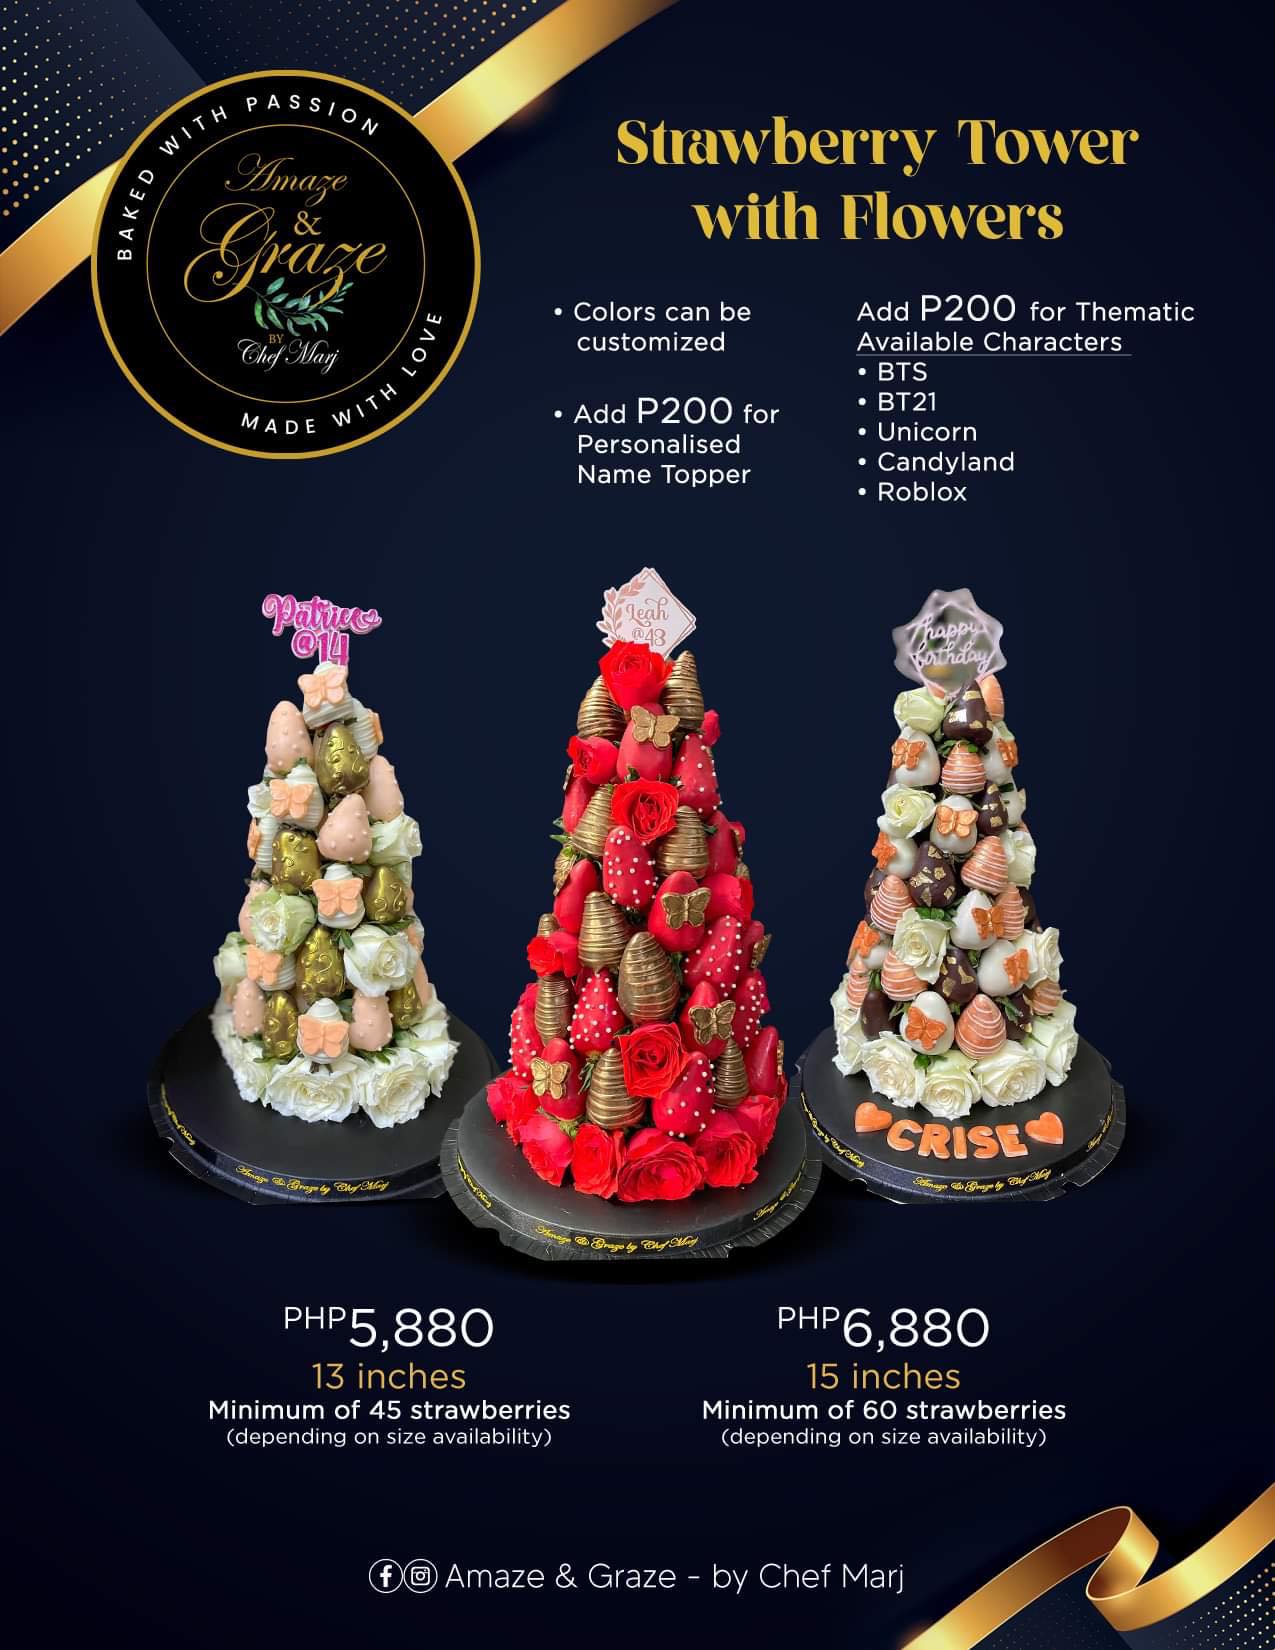 Strawberry Tower with Flowers